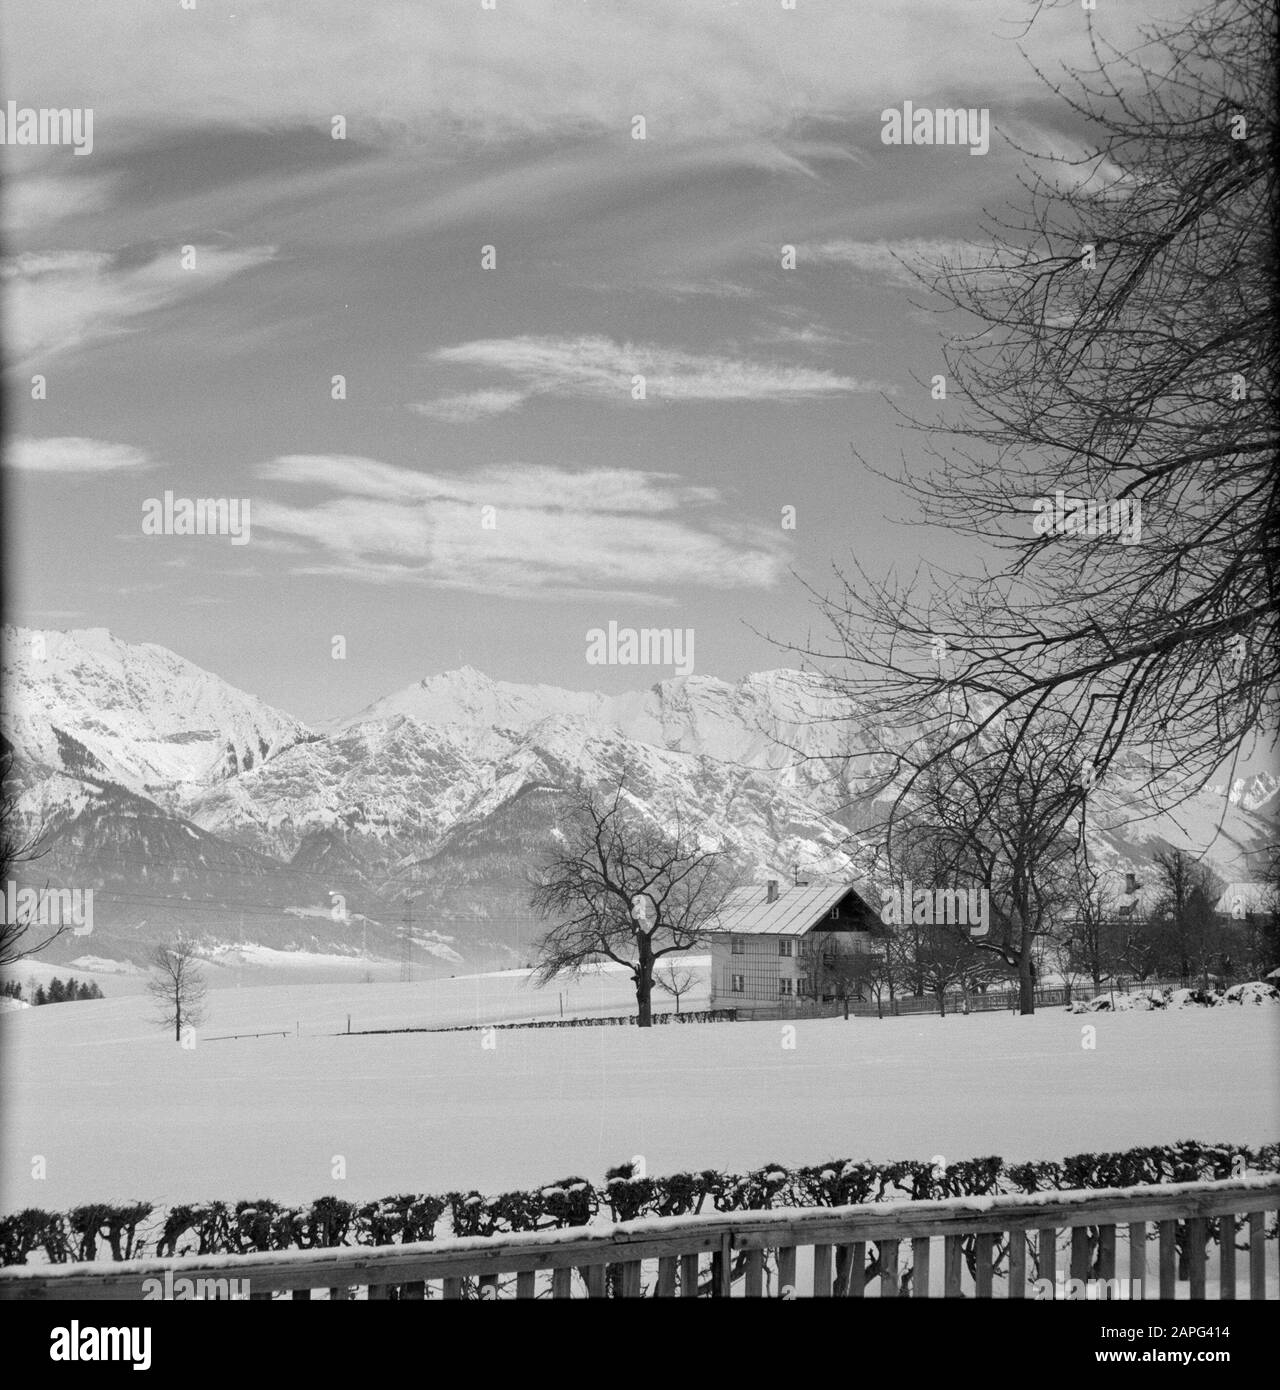 Winter in Tyrol Description: Chalet house in the snow with in the background the Karwendel Mountains Date: January 1960 Location: Austria, Sistrans, Tyrol Keywords: mountains, landscapes, snow, winter, housing Stock Photo